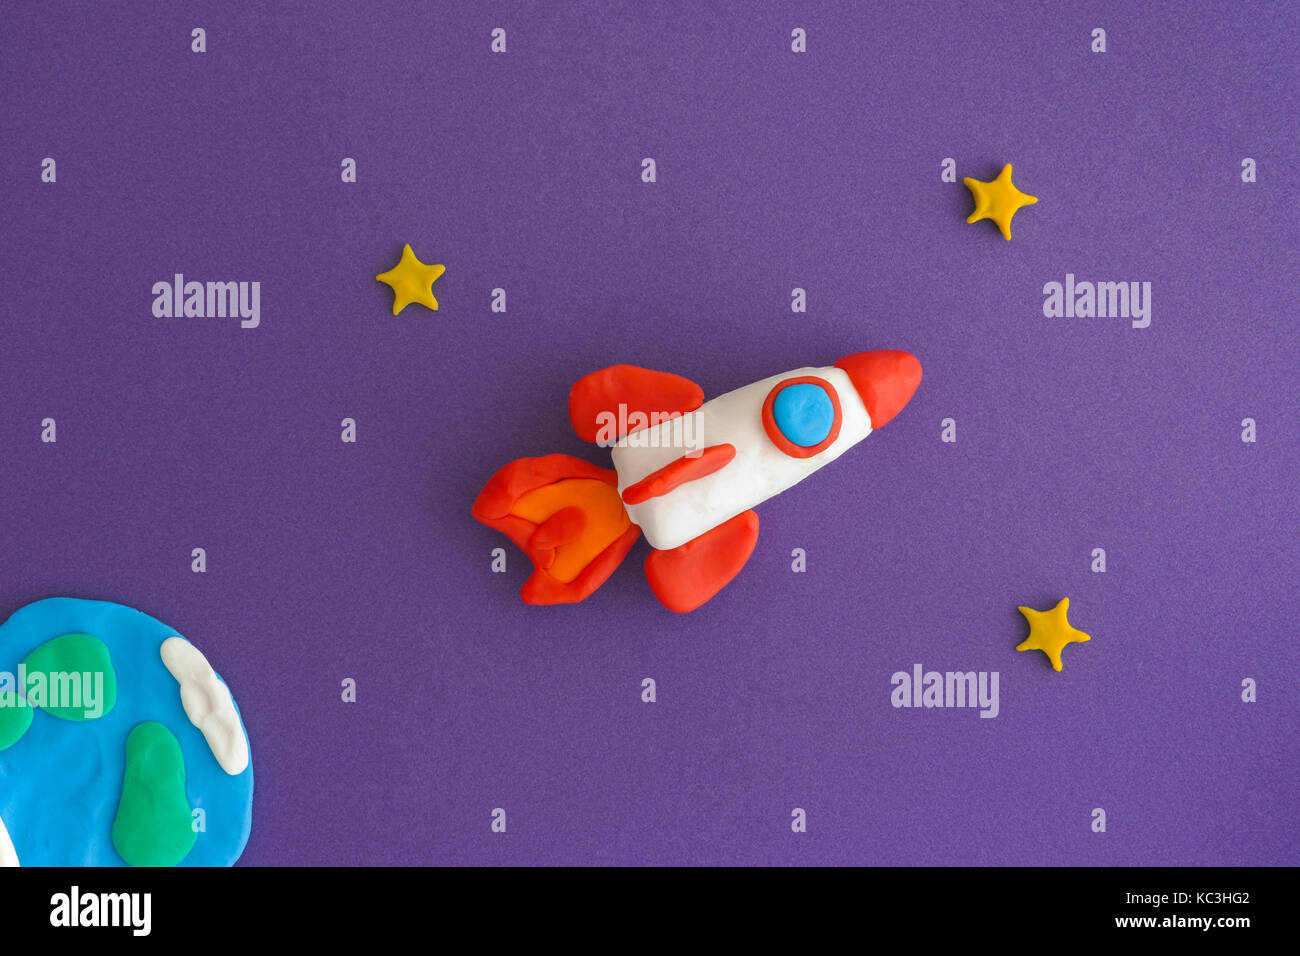 Space Rocket Blasting Off For New Ideas. Earth, space rocket and stars are made out of play clay (plasticine). Stock Photo